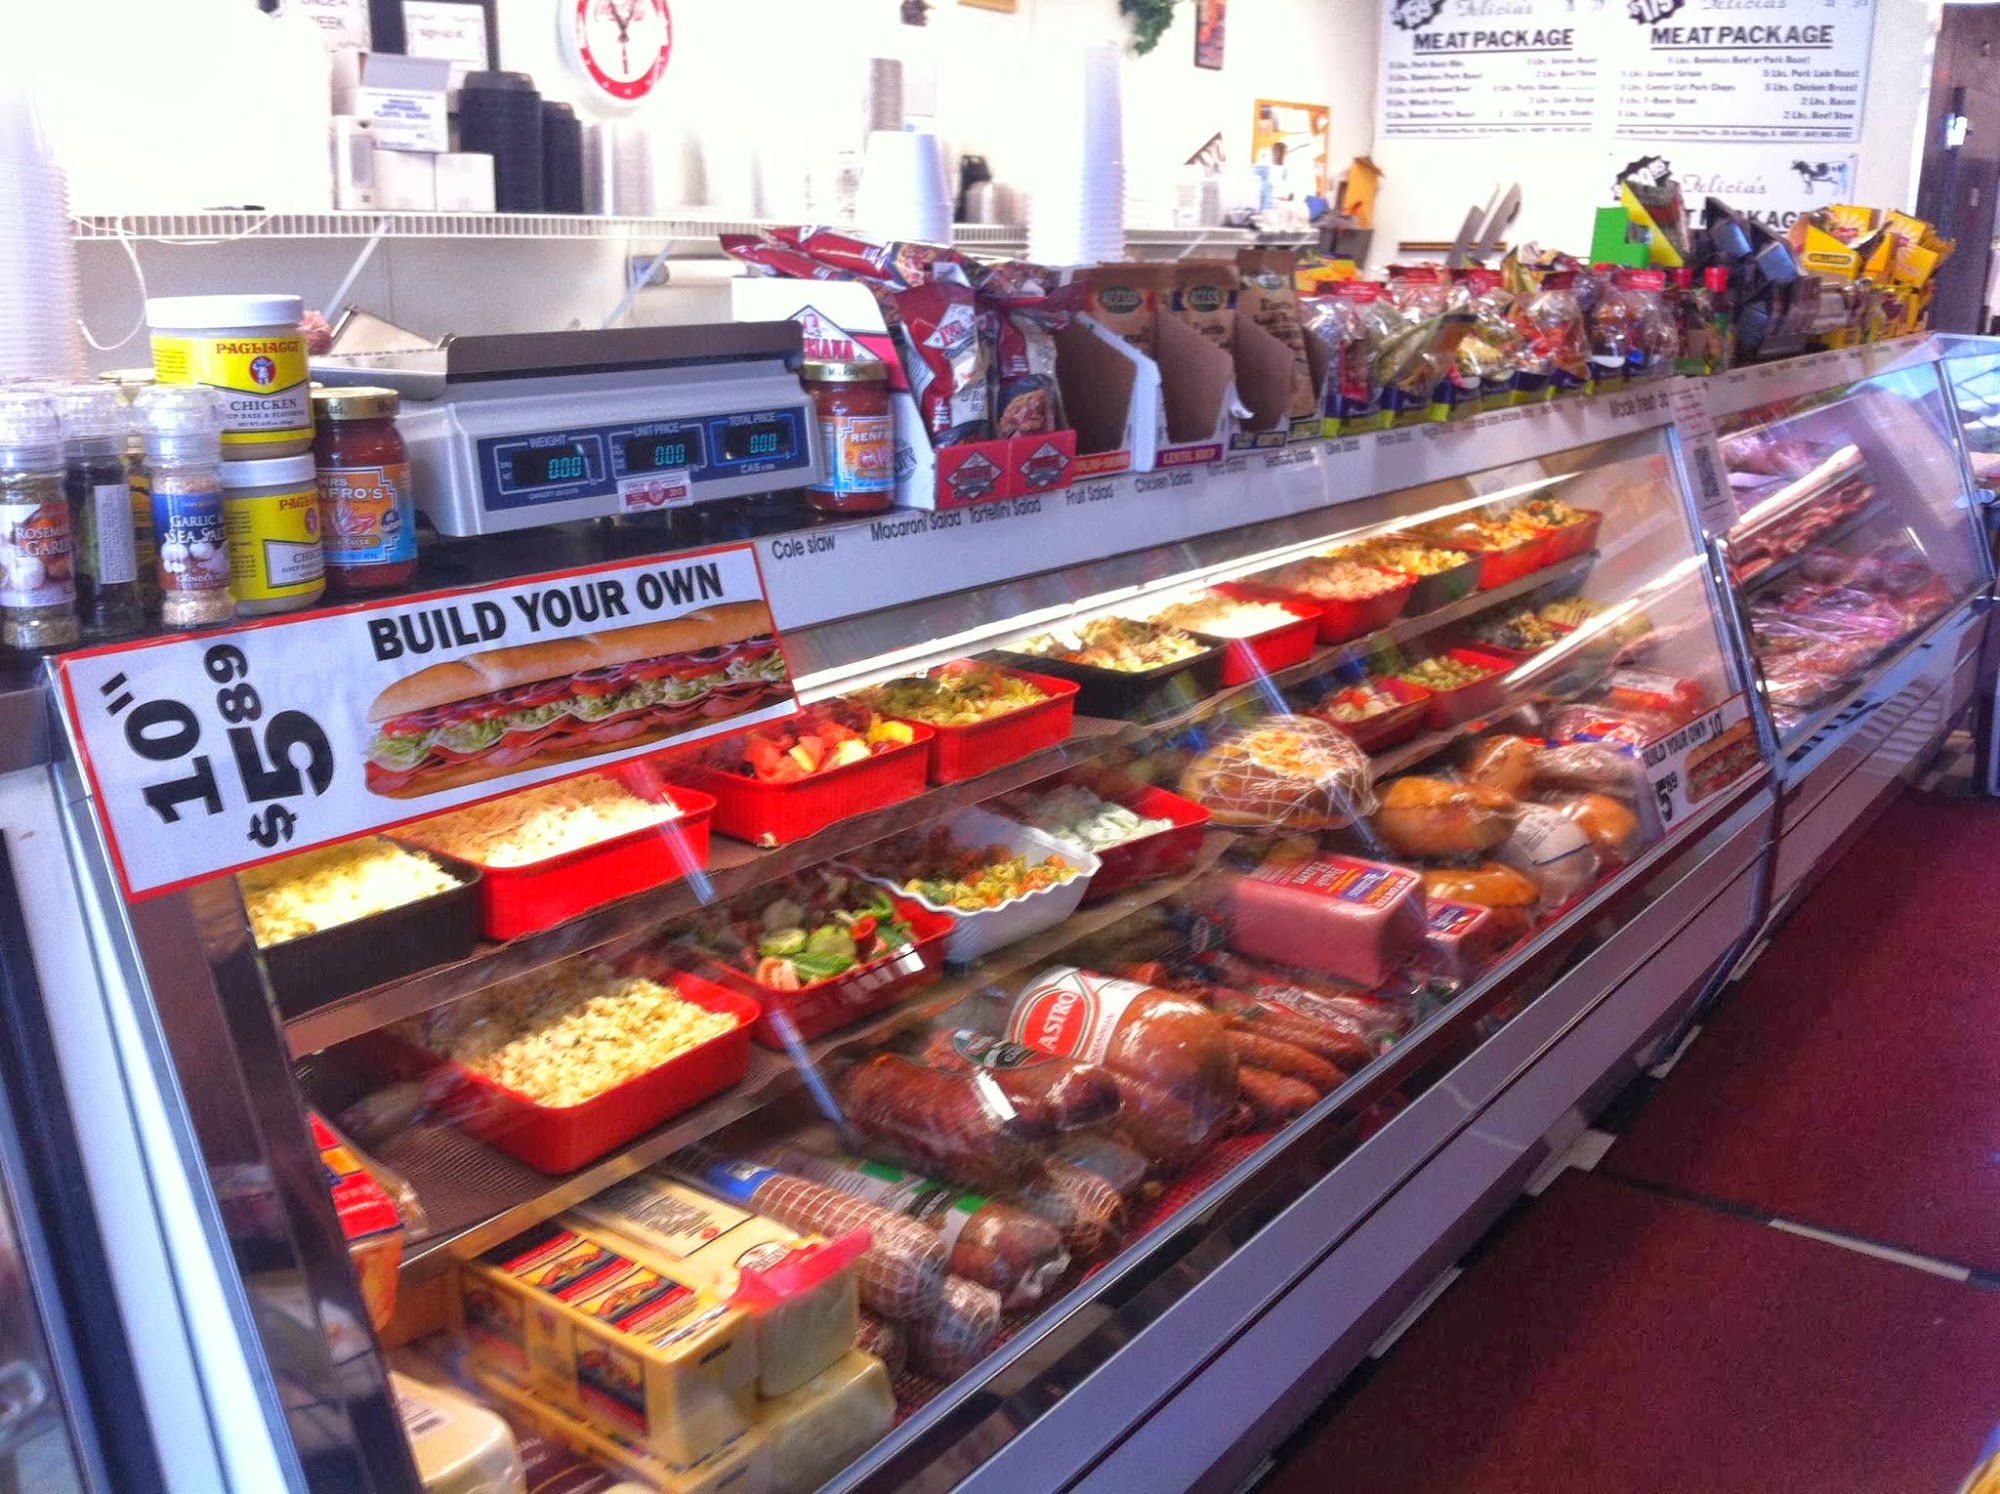 Felicia's Meat Market, Deli and Catering